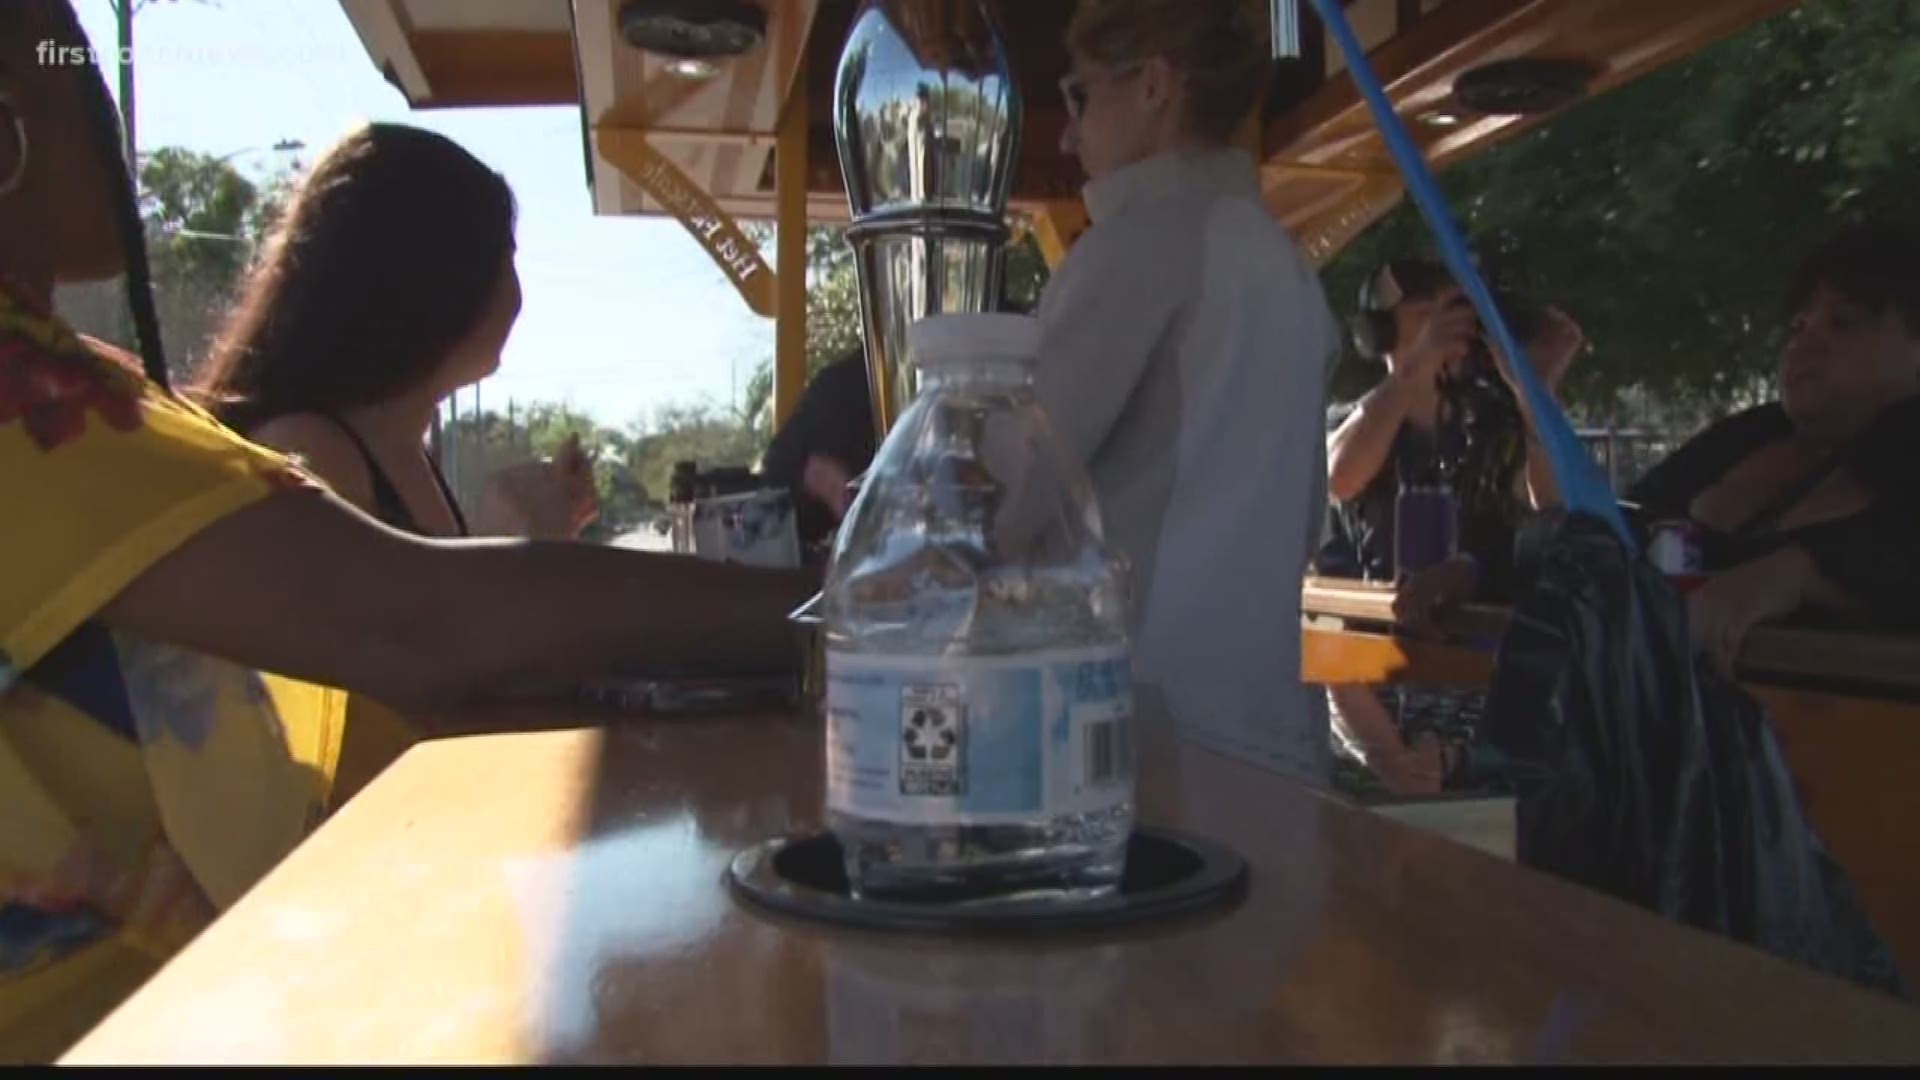 Pedal, pedal, pedal, coast! Those words were echoing through 5 Points and Riverside as Pedal Pub Jax rolled through.